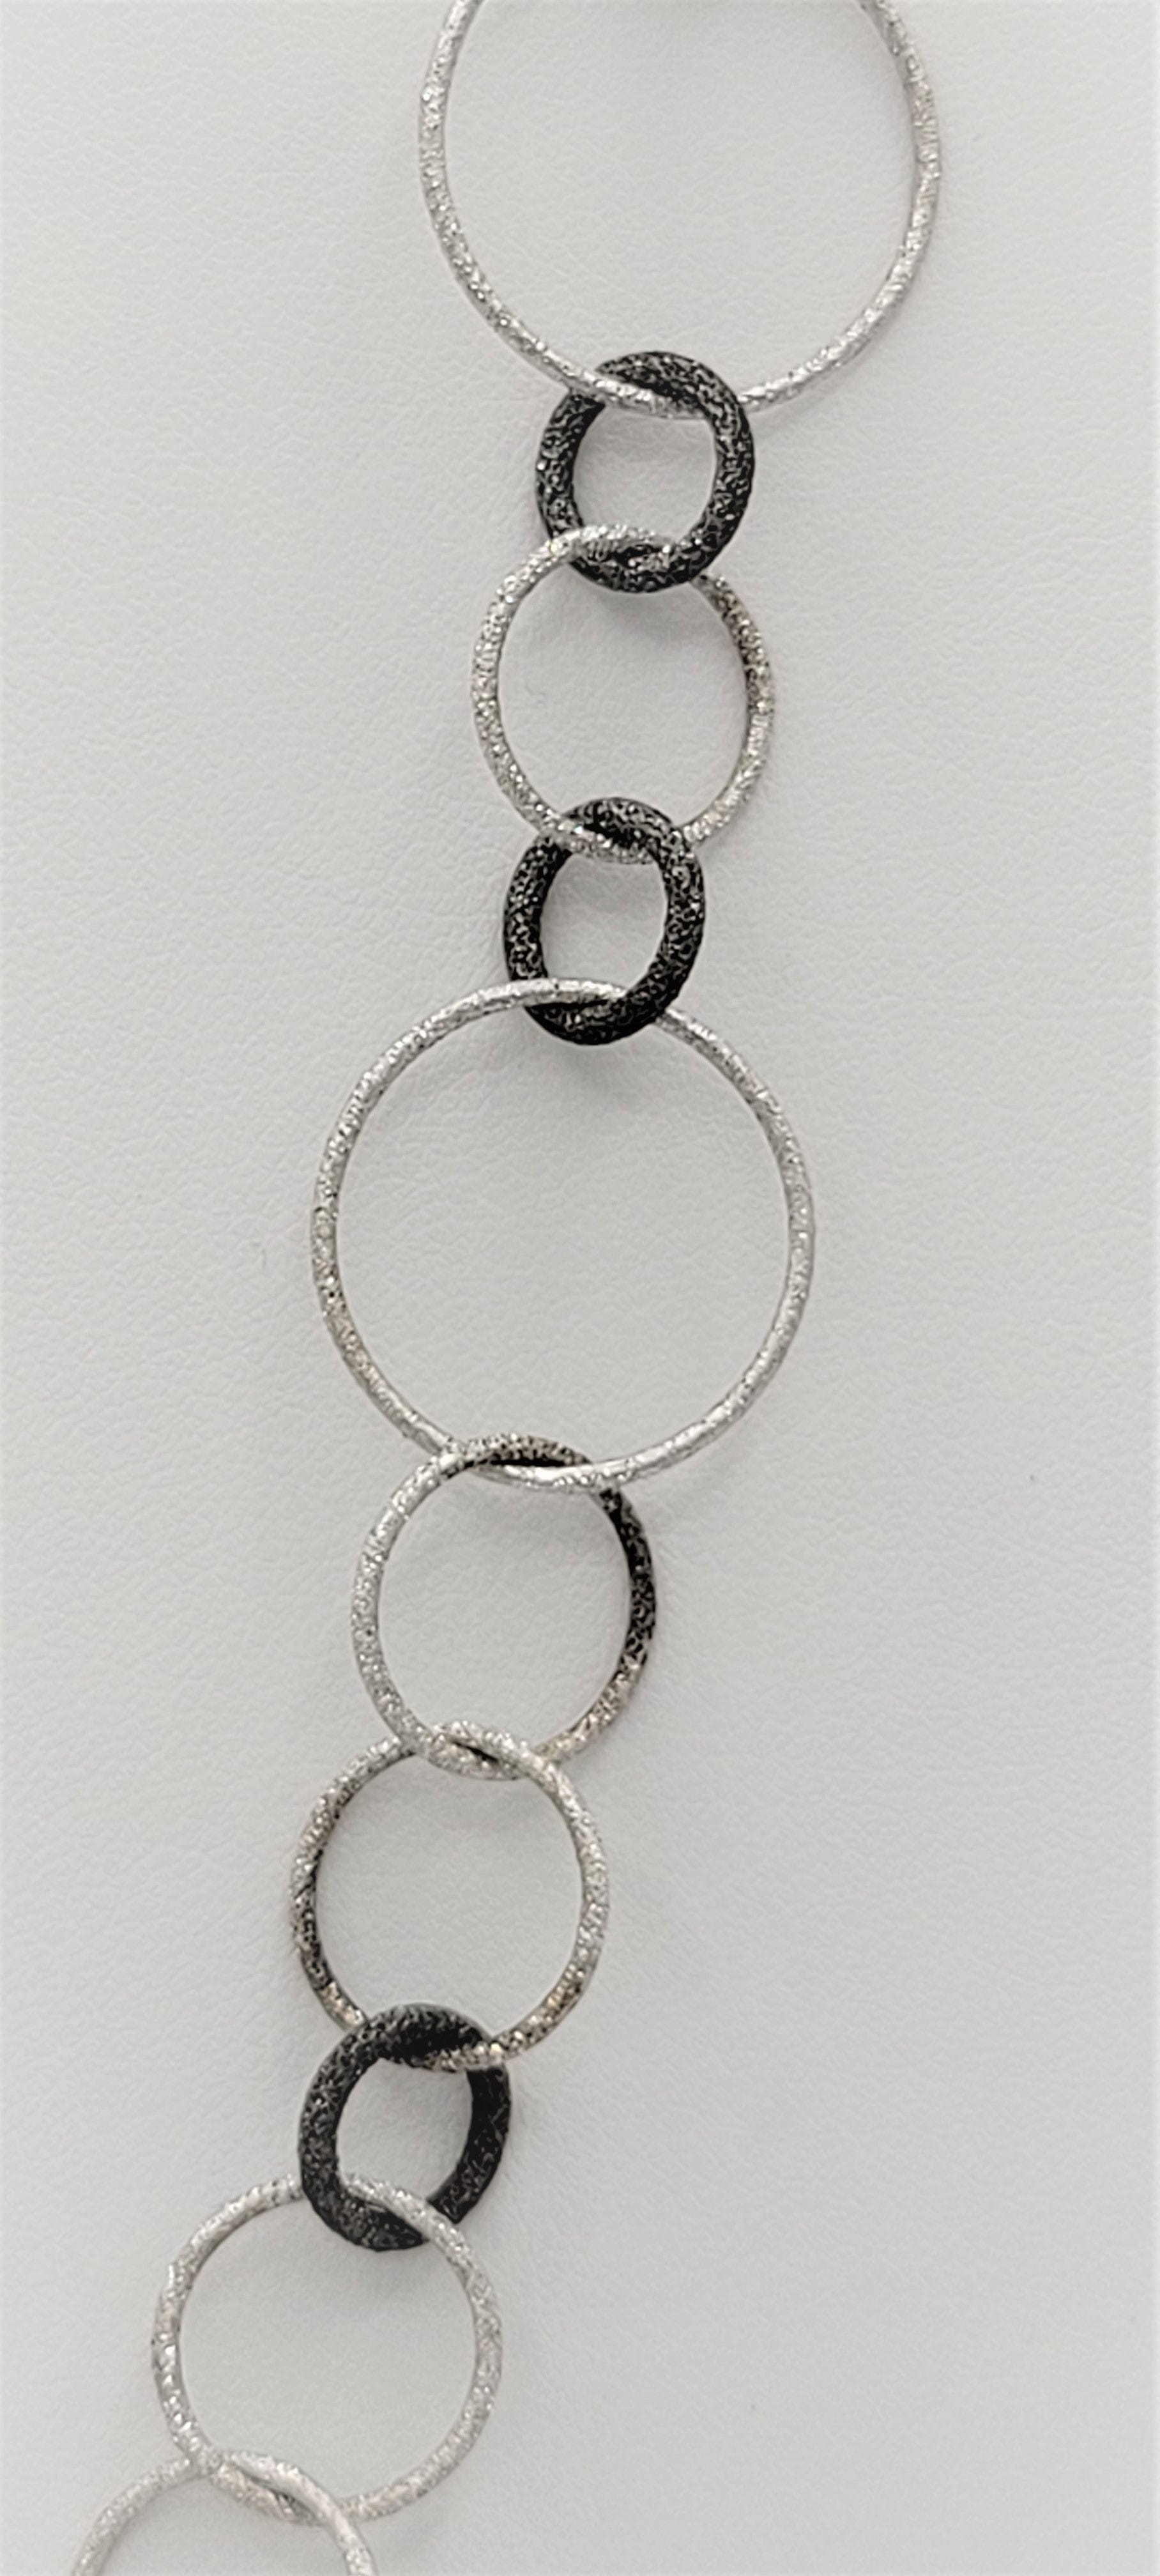 Frederic Duclos Jewelry Retired Sterling Modernist Circles Necklace by French Designer Frederic Duclos